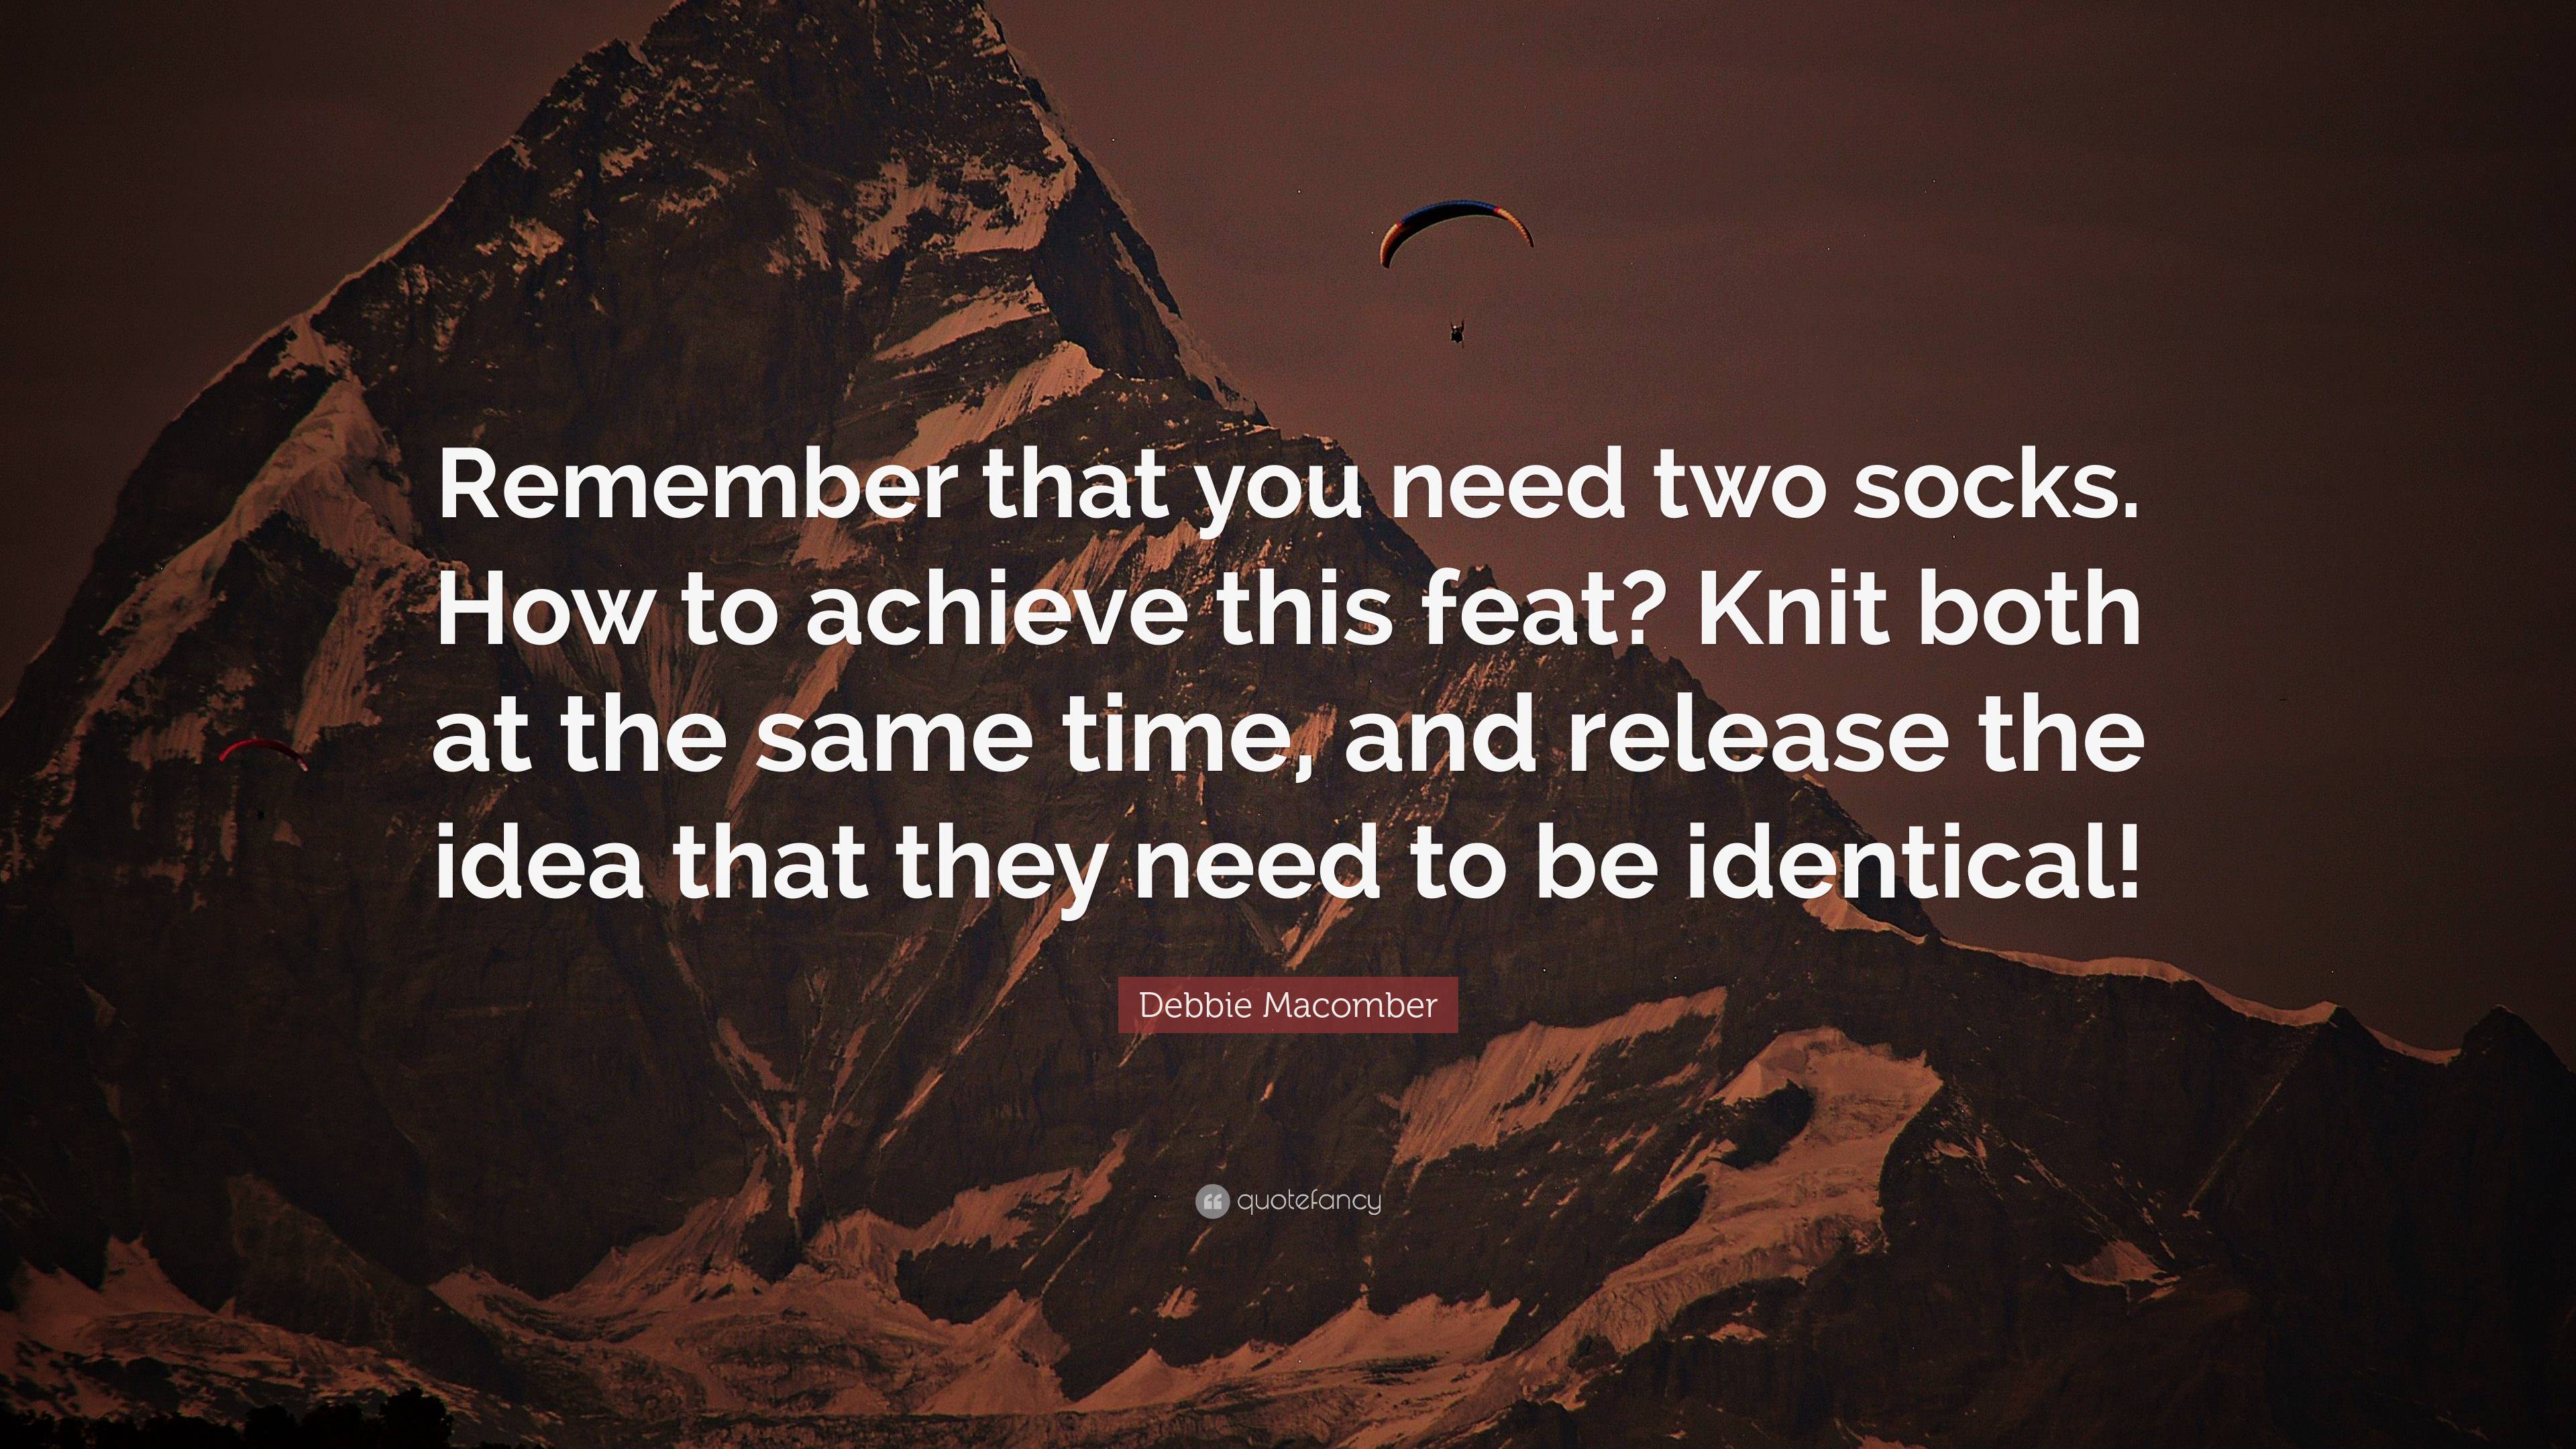 Debbie Macomber Quote: “Remember that you need two socks. How to ...